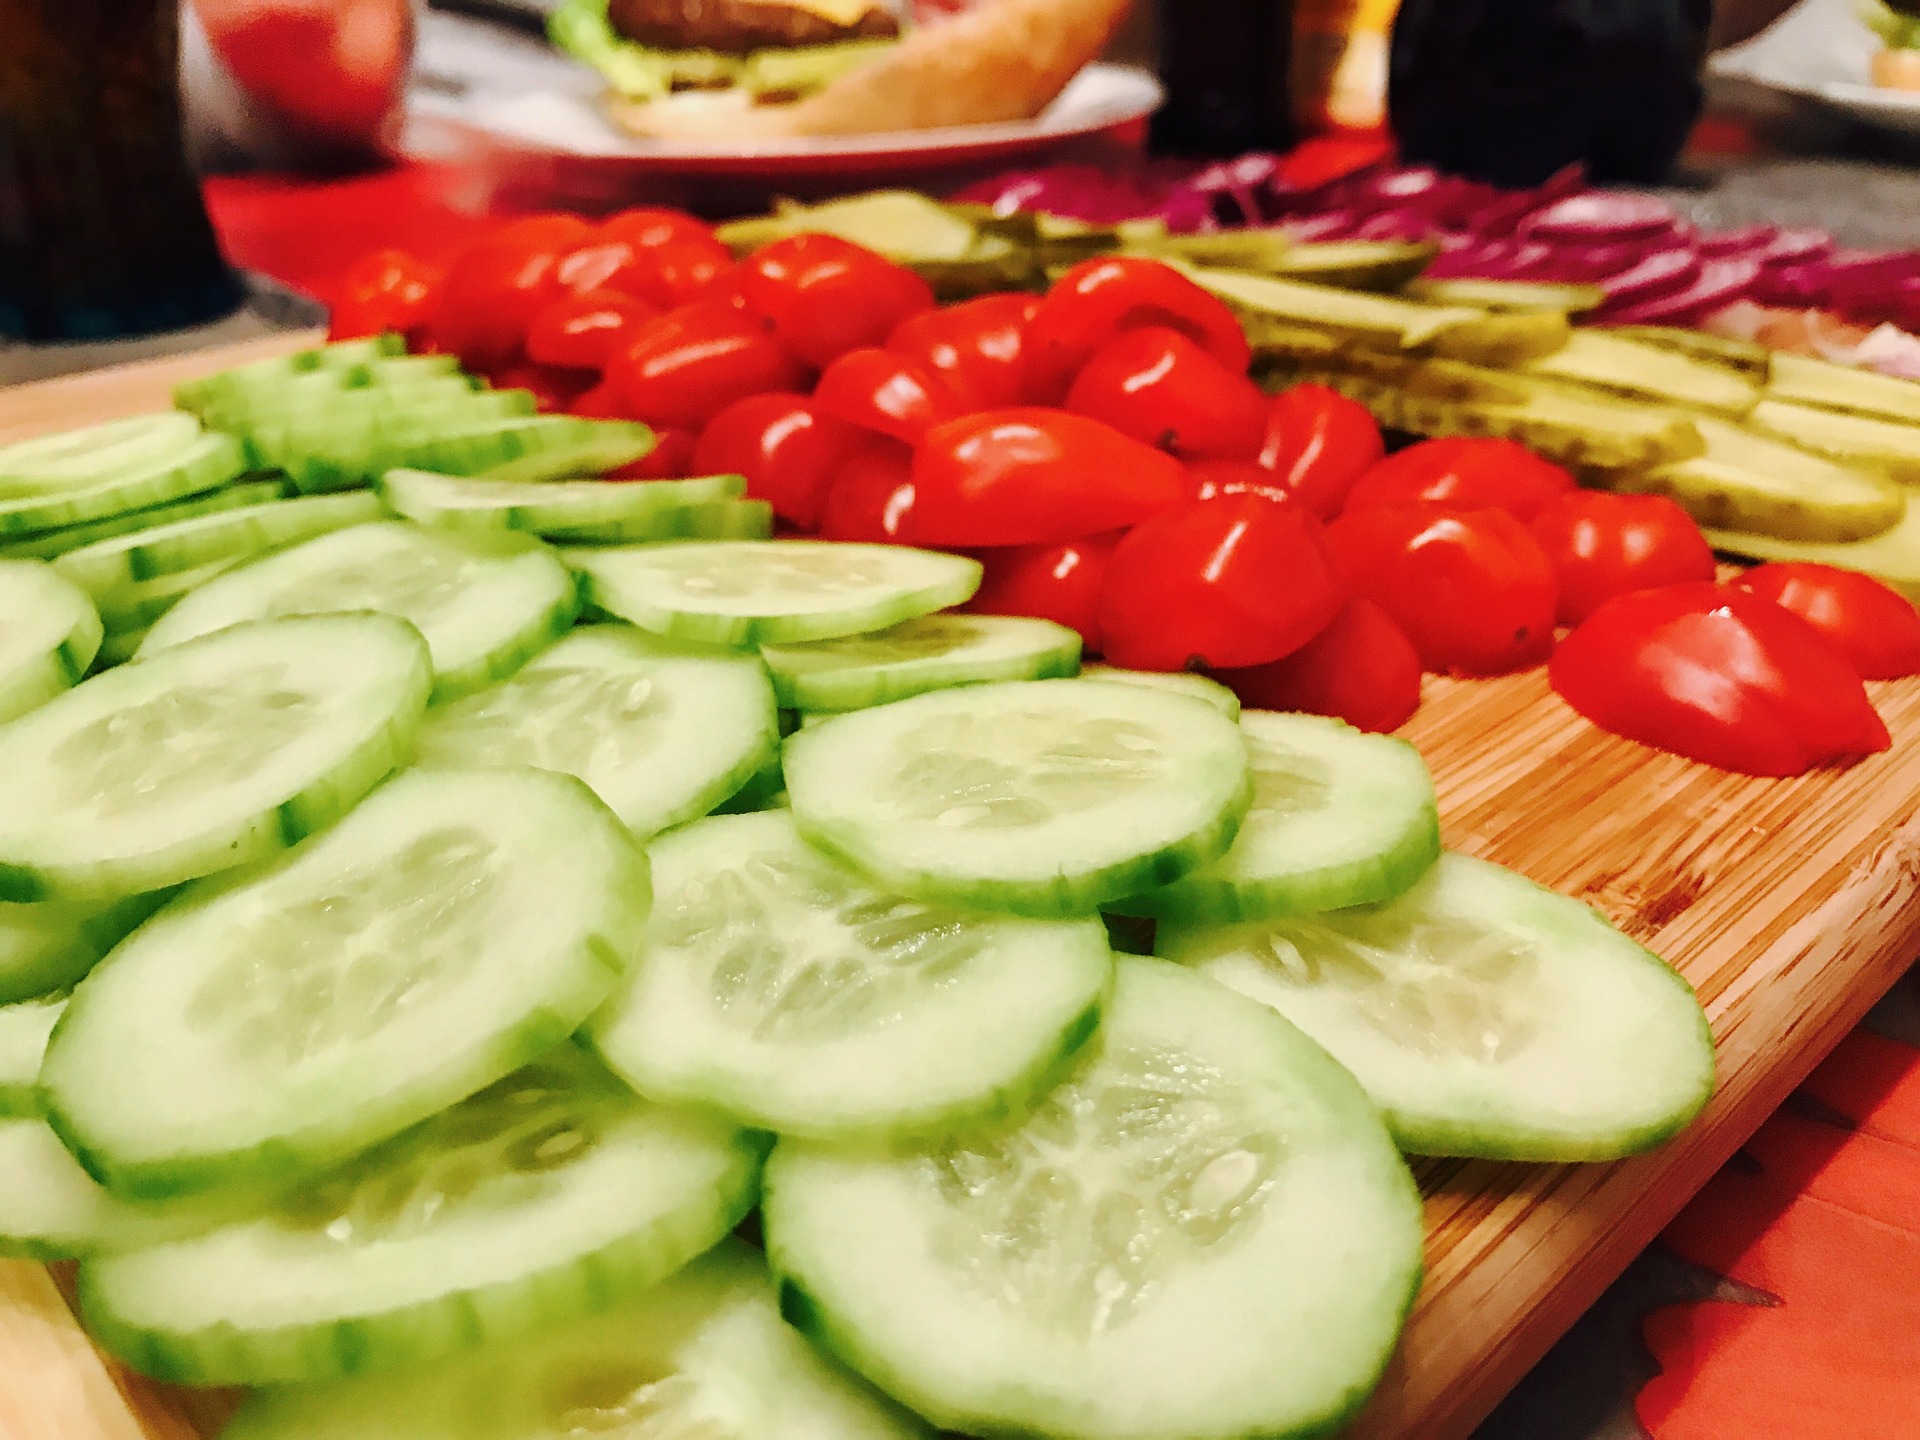 Cucumbers and tomatoes on a cutting board.